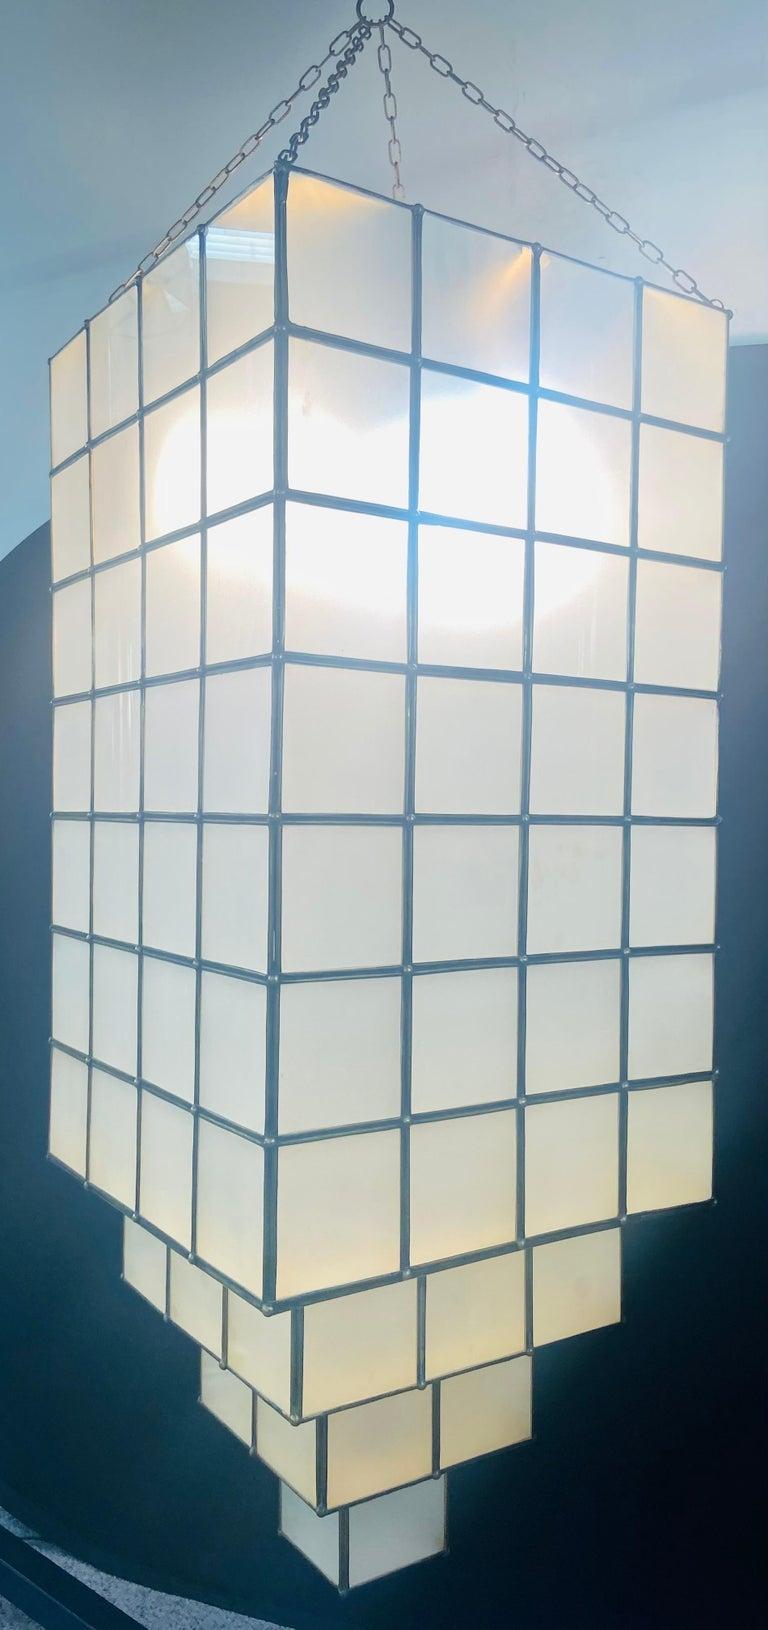 Light up your room with this stunning handmade pair of Art Deco style rectangular skyscraper design chandeliers or lanterns made of frosted white milk glass with fine brass frame. The chandeliers are built with square glass panels creating an